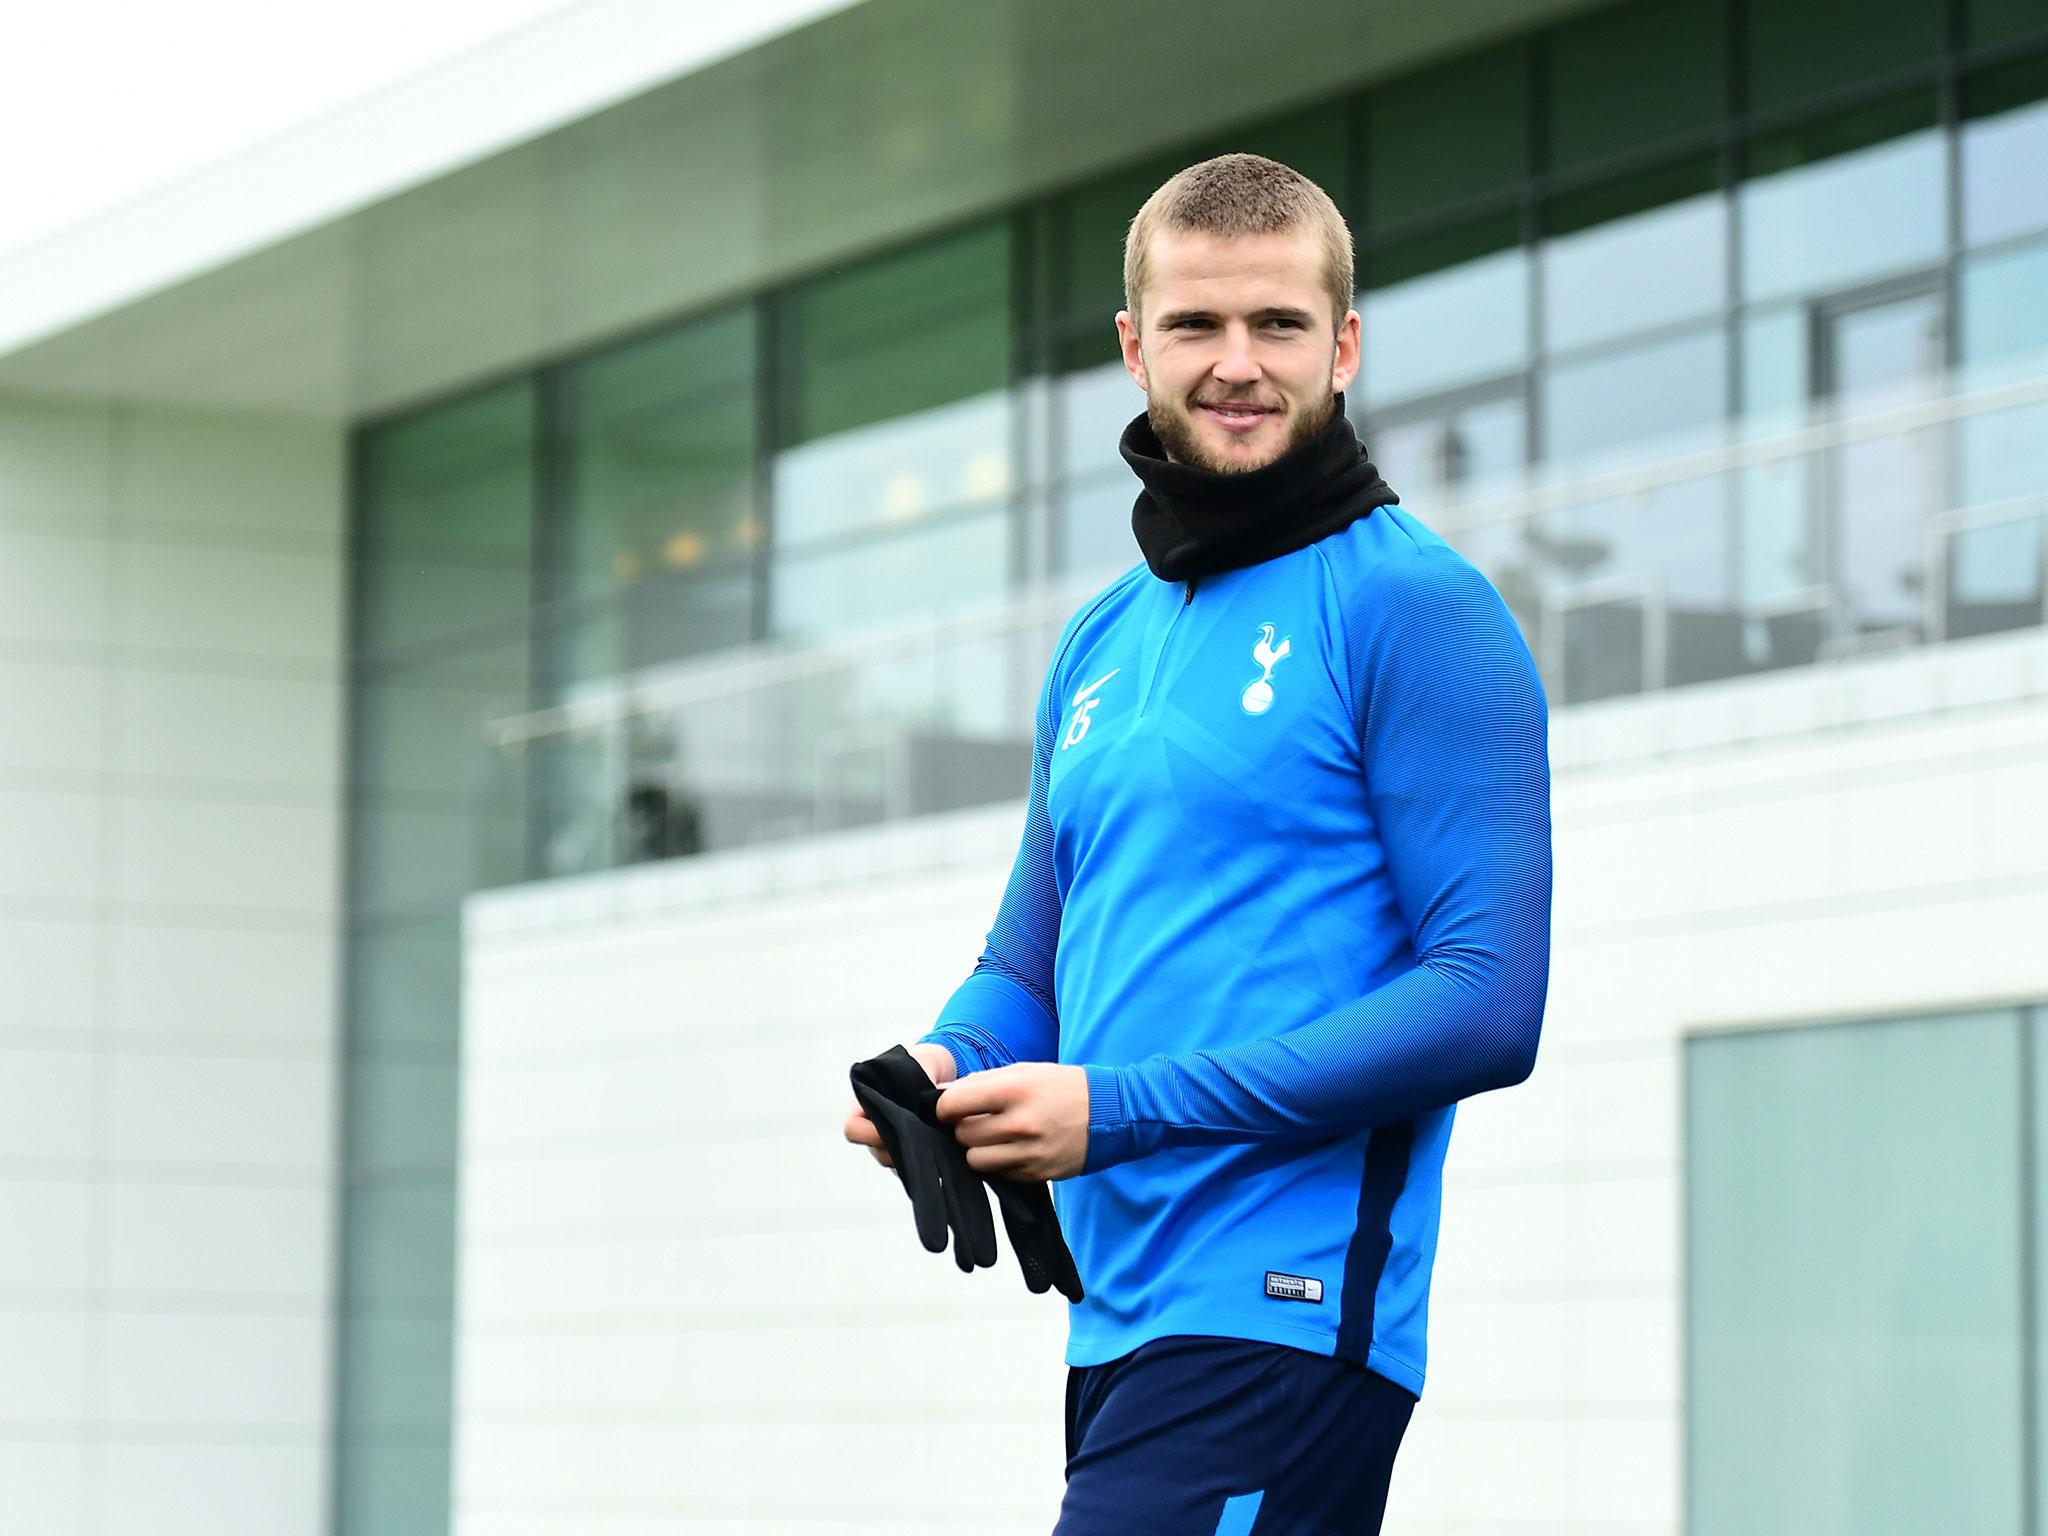 Eric Dier was the subject of numerous transfer rumours last summer